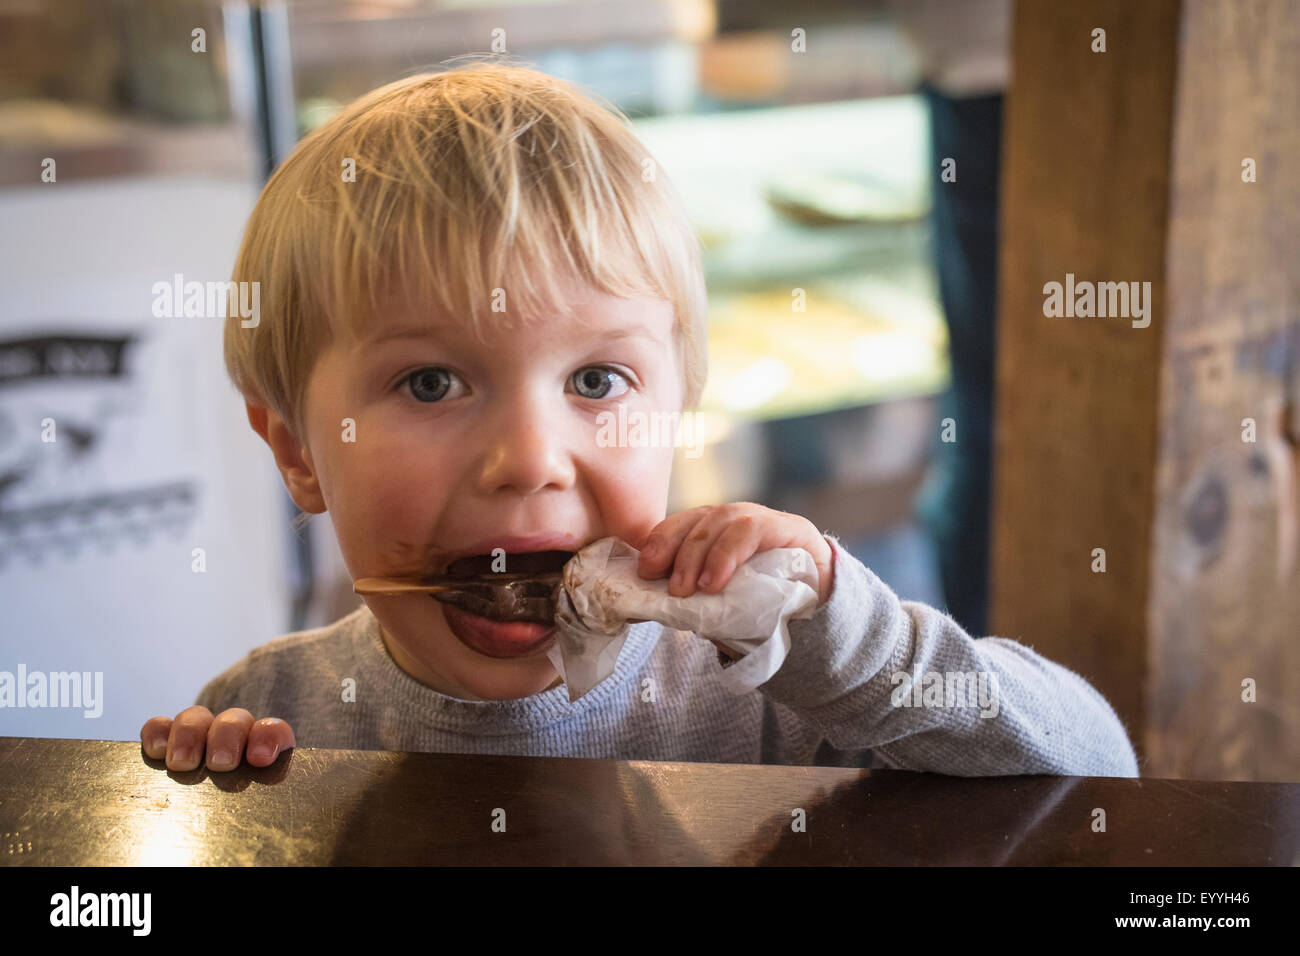 Messy Caucasian boy eating popsicle in kitchen Stock Photo